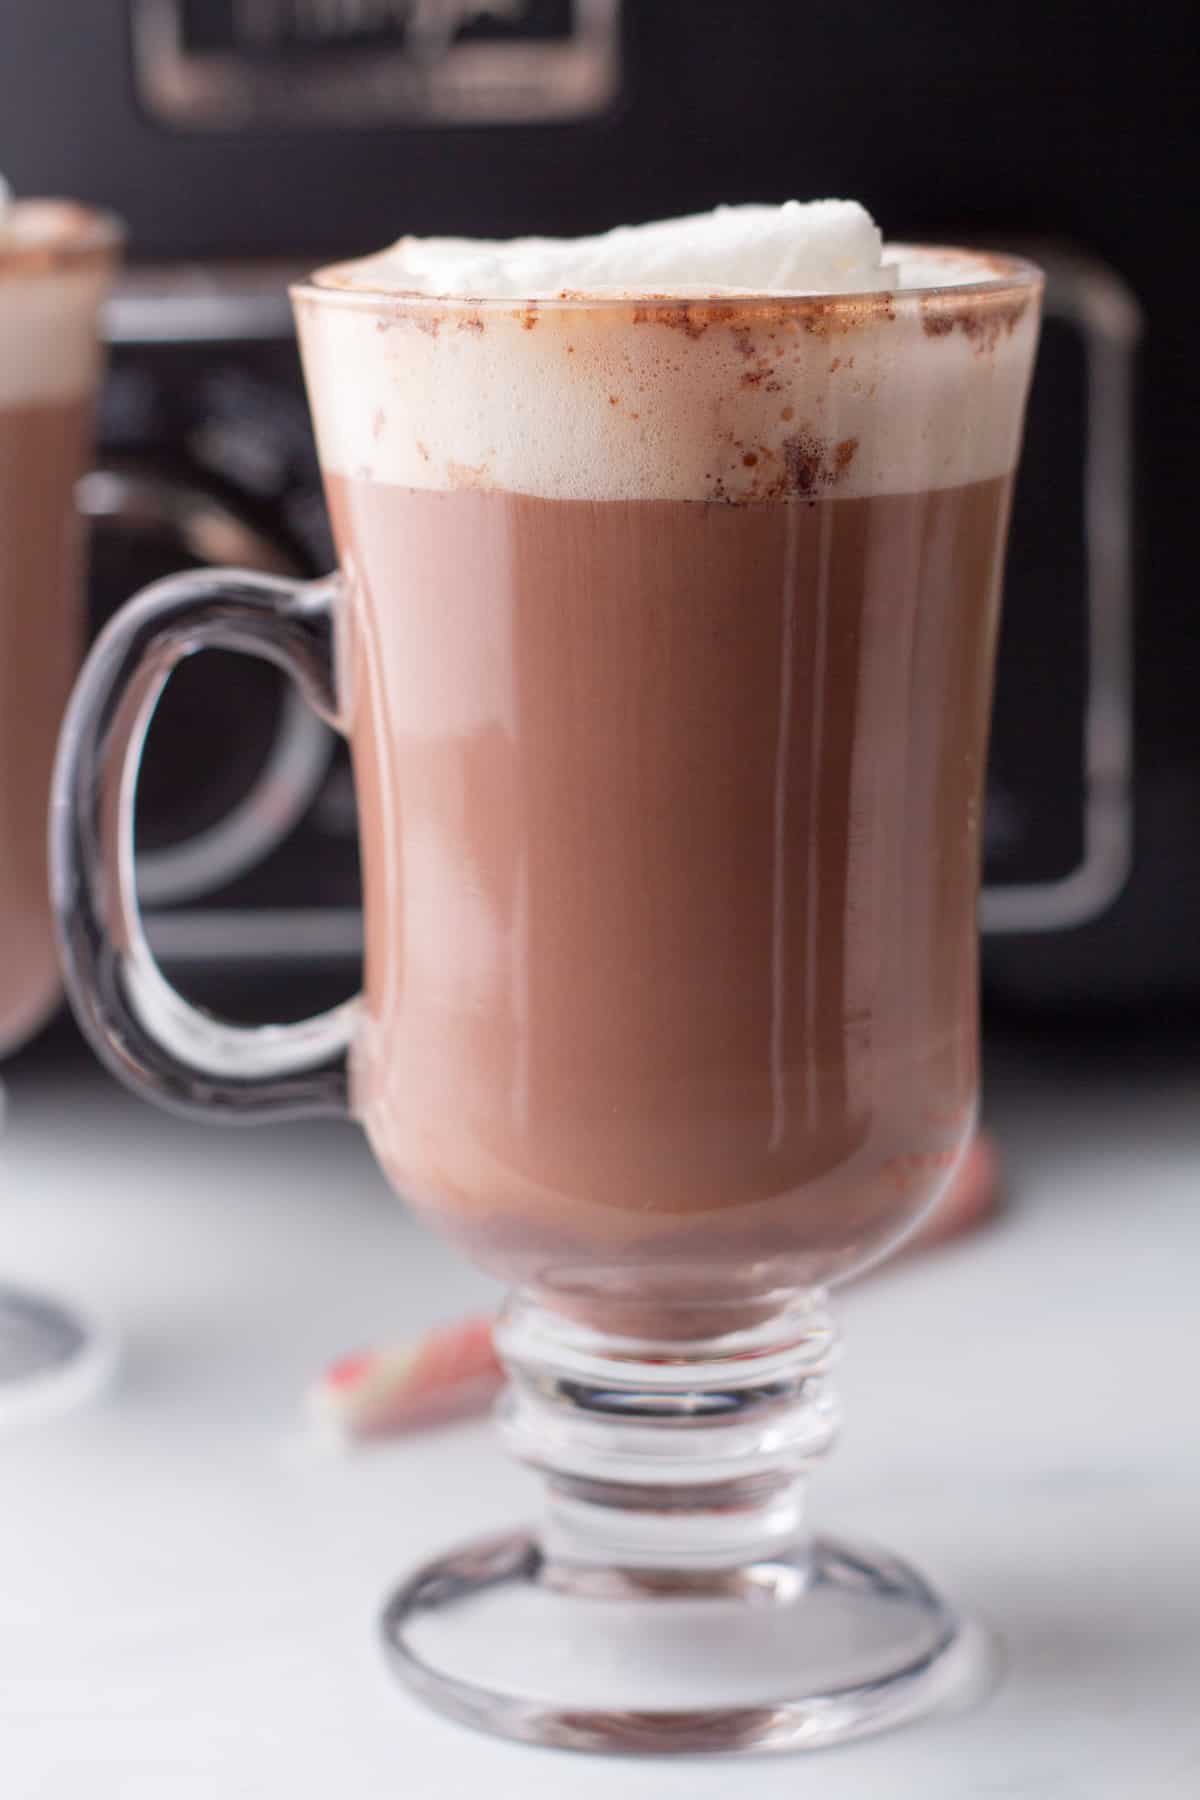 Two glasses of hot chocolate in front of a coffee maker.